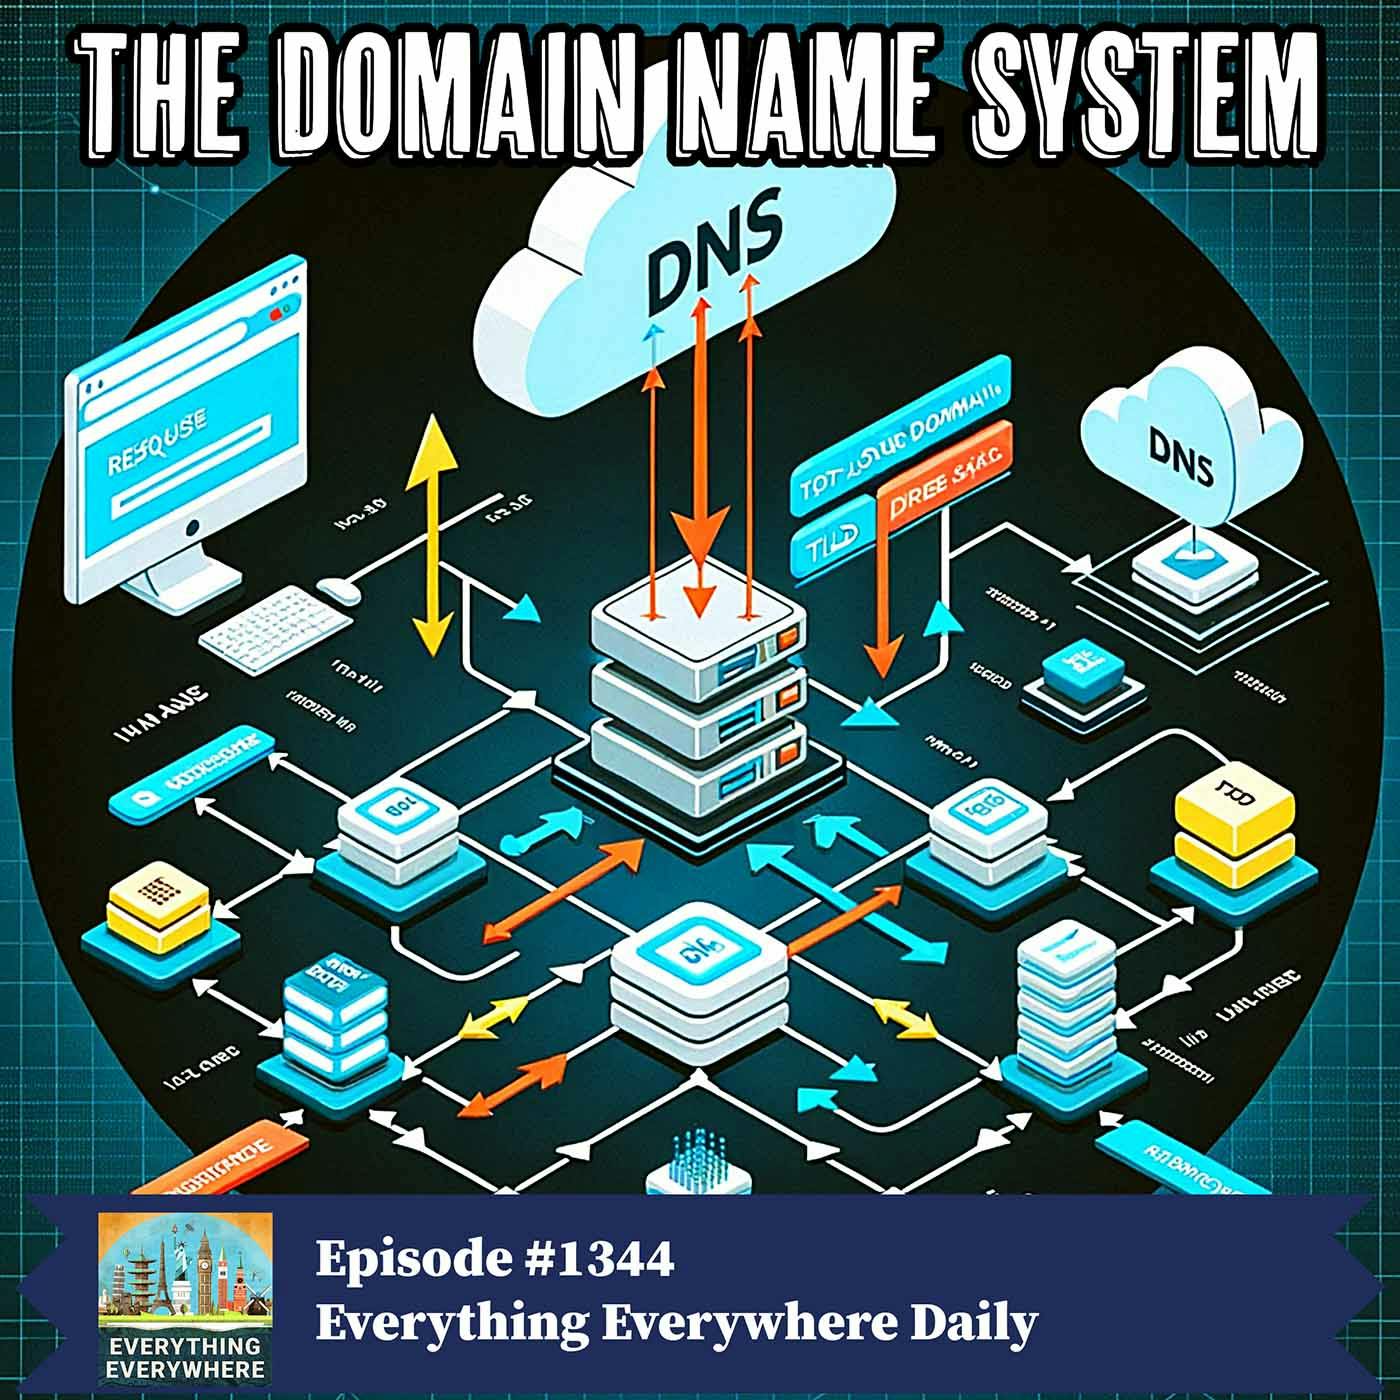 The Domain Name System